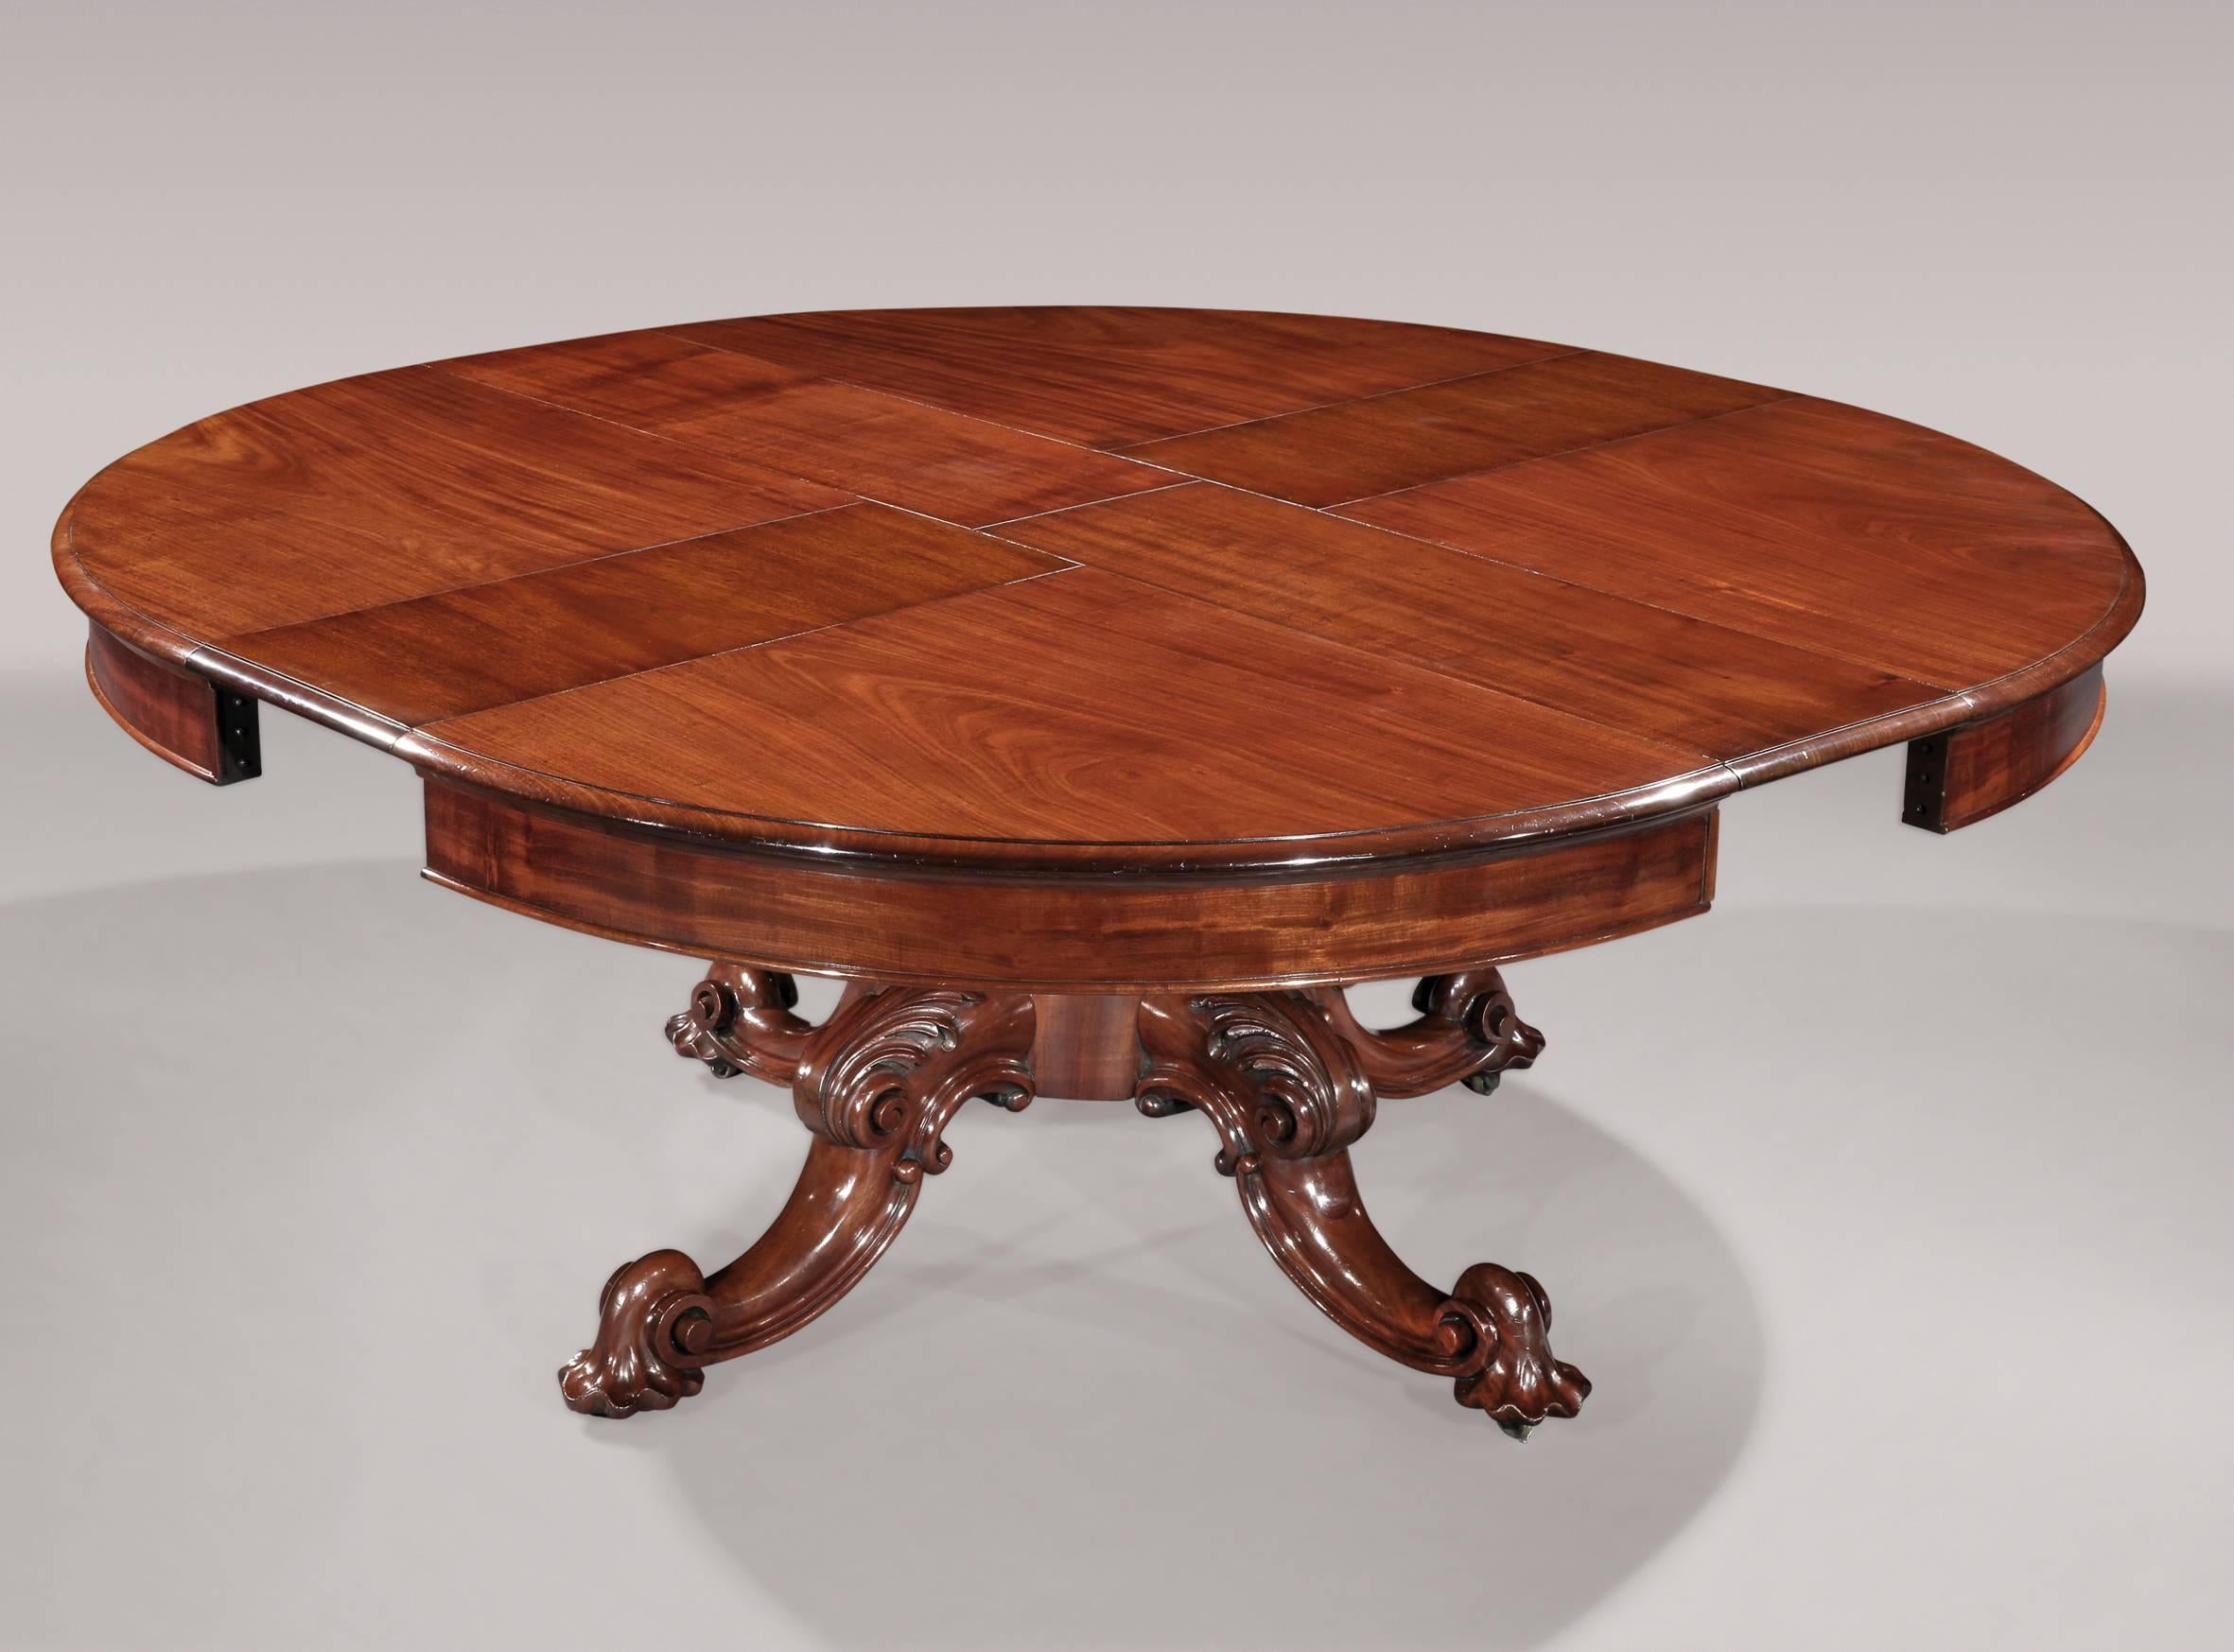 An impressive mid-19th century figured mahogany circular dining table with unusual wind-out extending mechanism bearing maker’s label: “T. H. Filmer’s cabinet, upholstery, bedding and carpet manufactory, 28.32.34 Berners St. Oxford St. London. W.”,